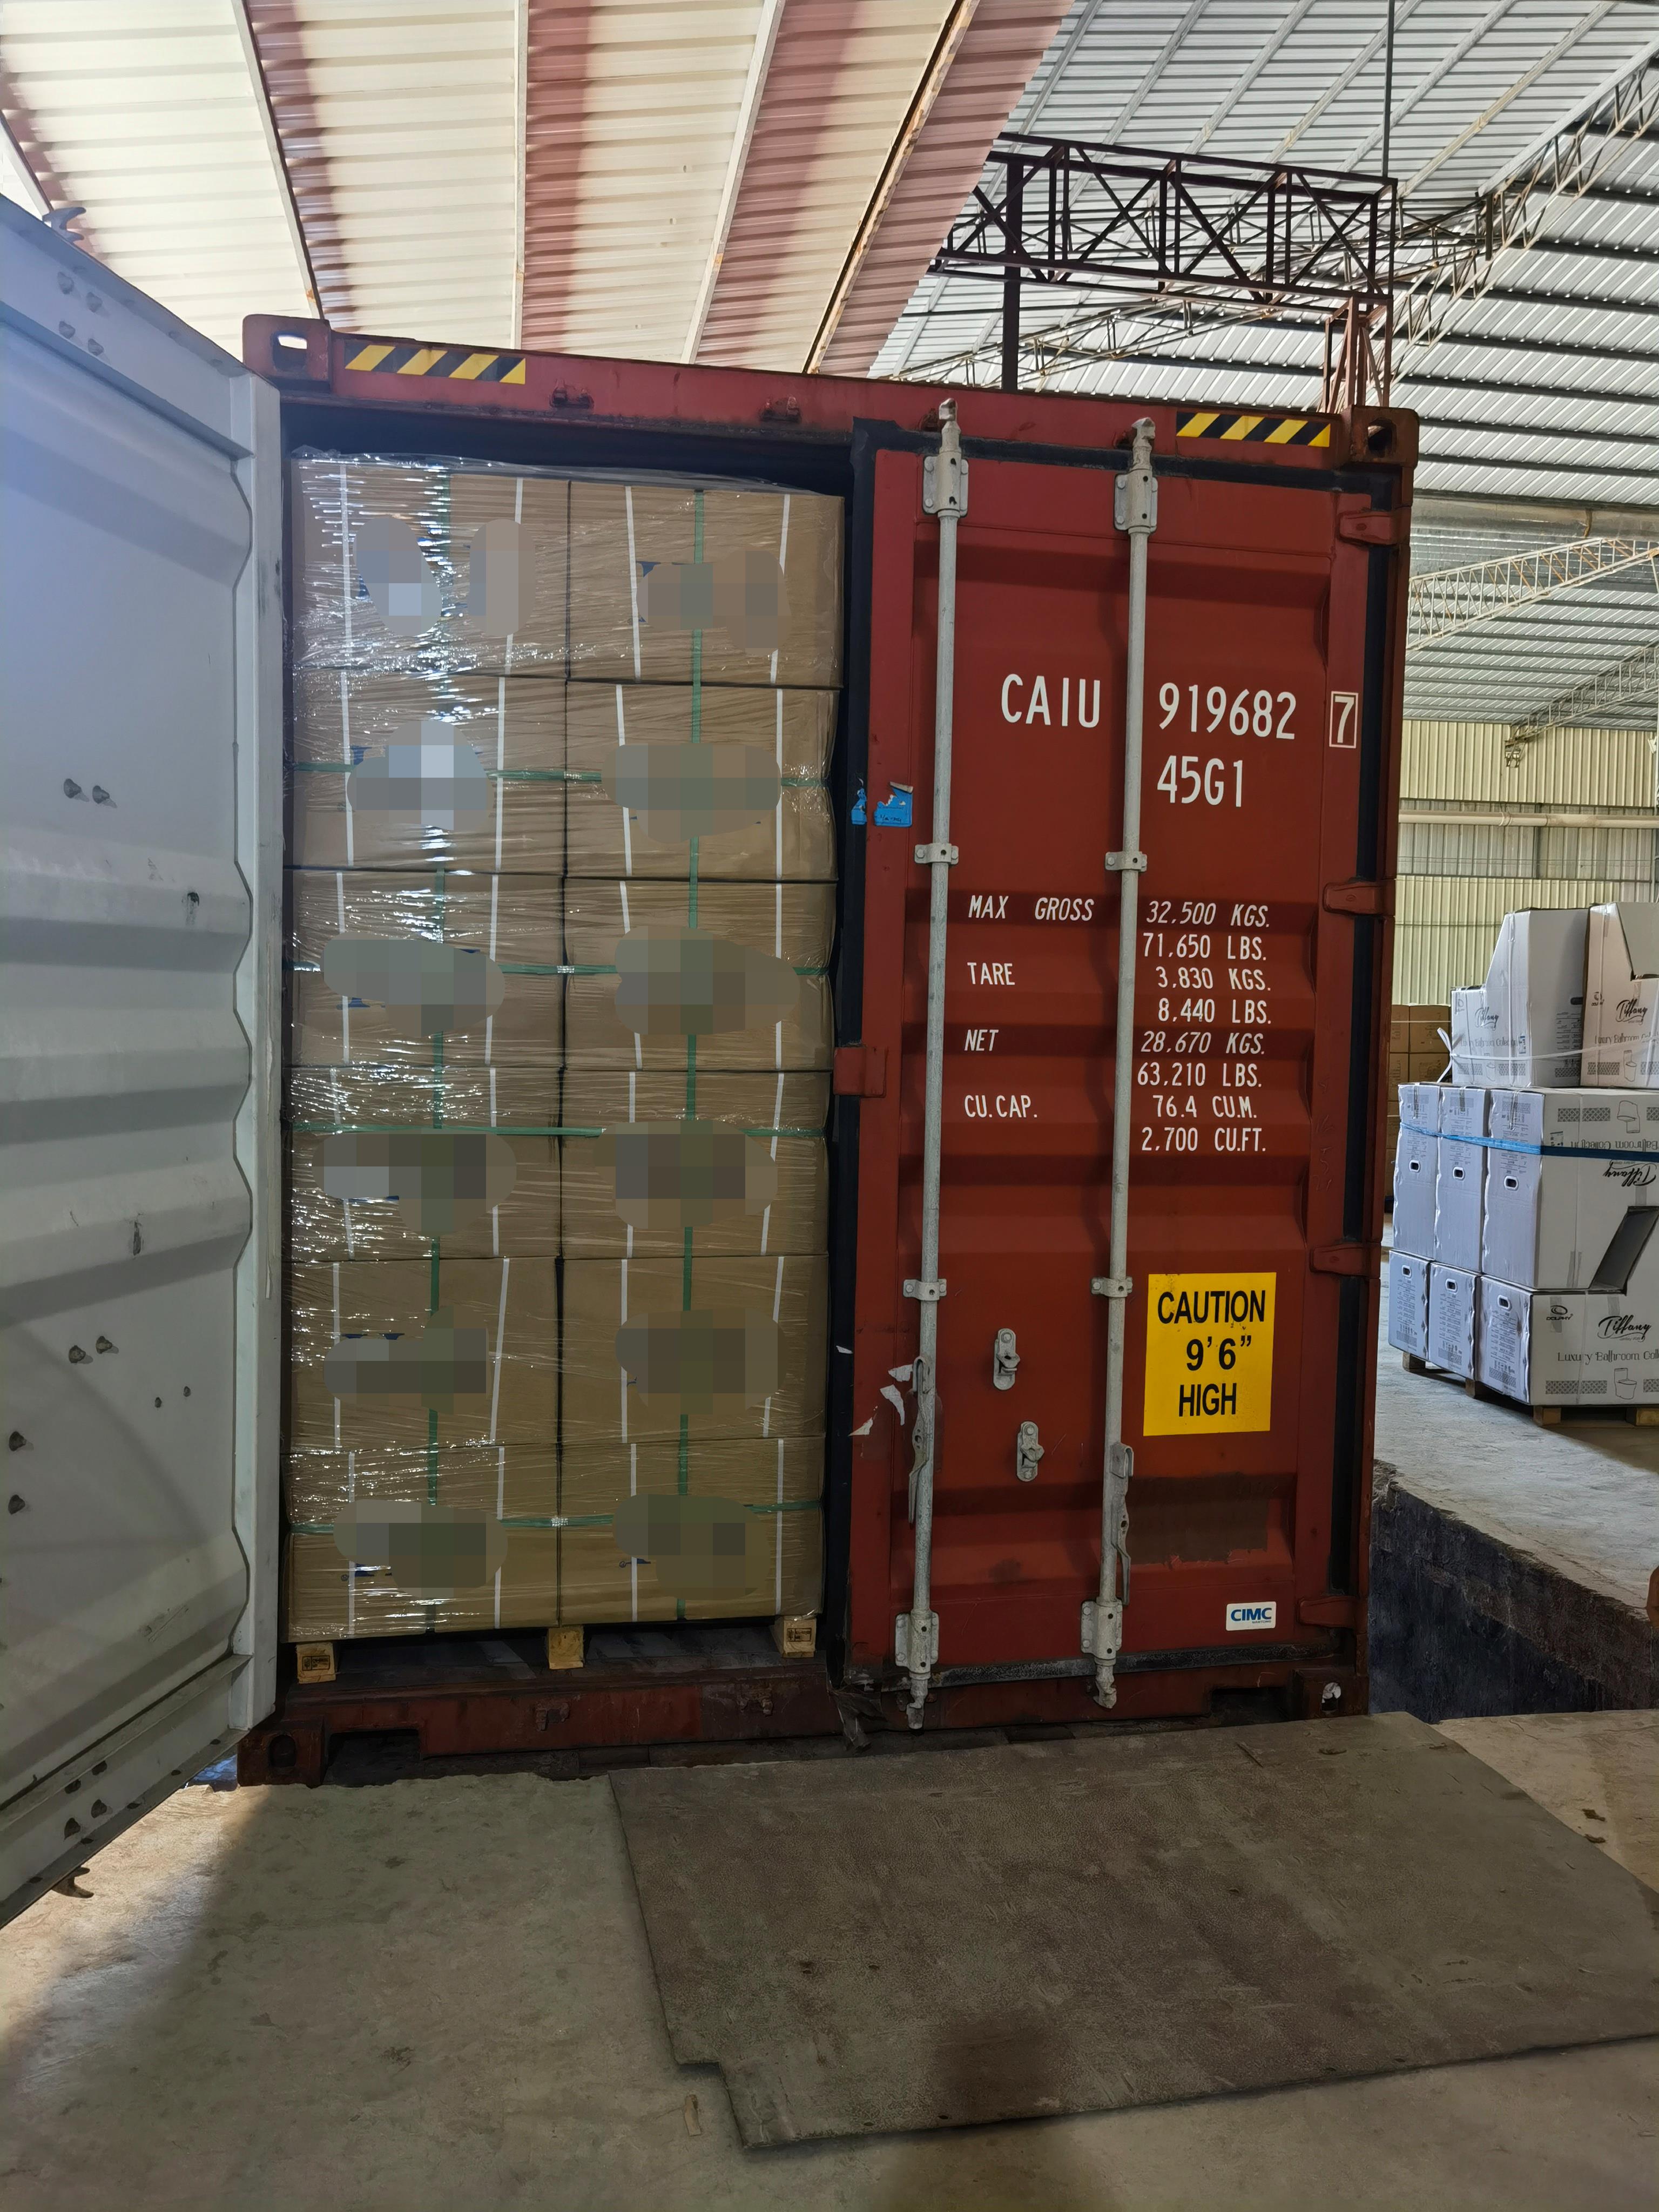 Fabia Sanitary Ware Containers Loading